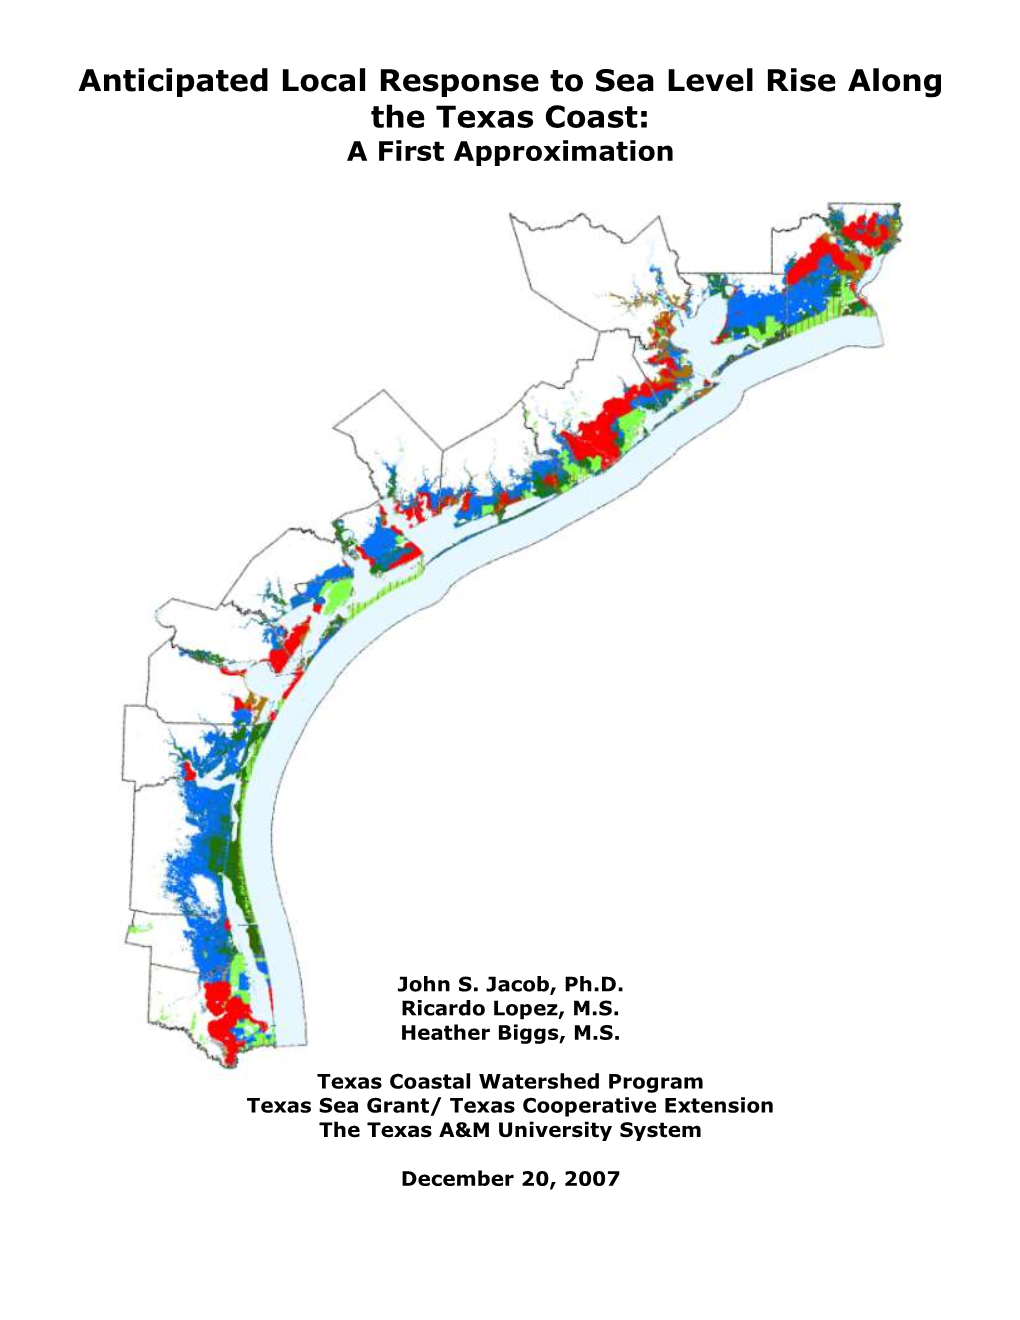 Anticipated Local Response to Sea Level Rise Along the Texas Coast: a First Approximation